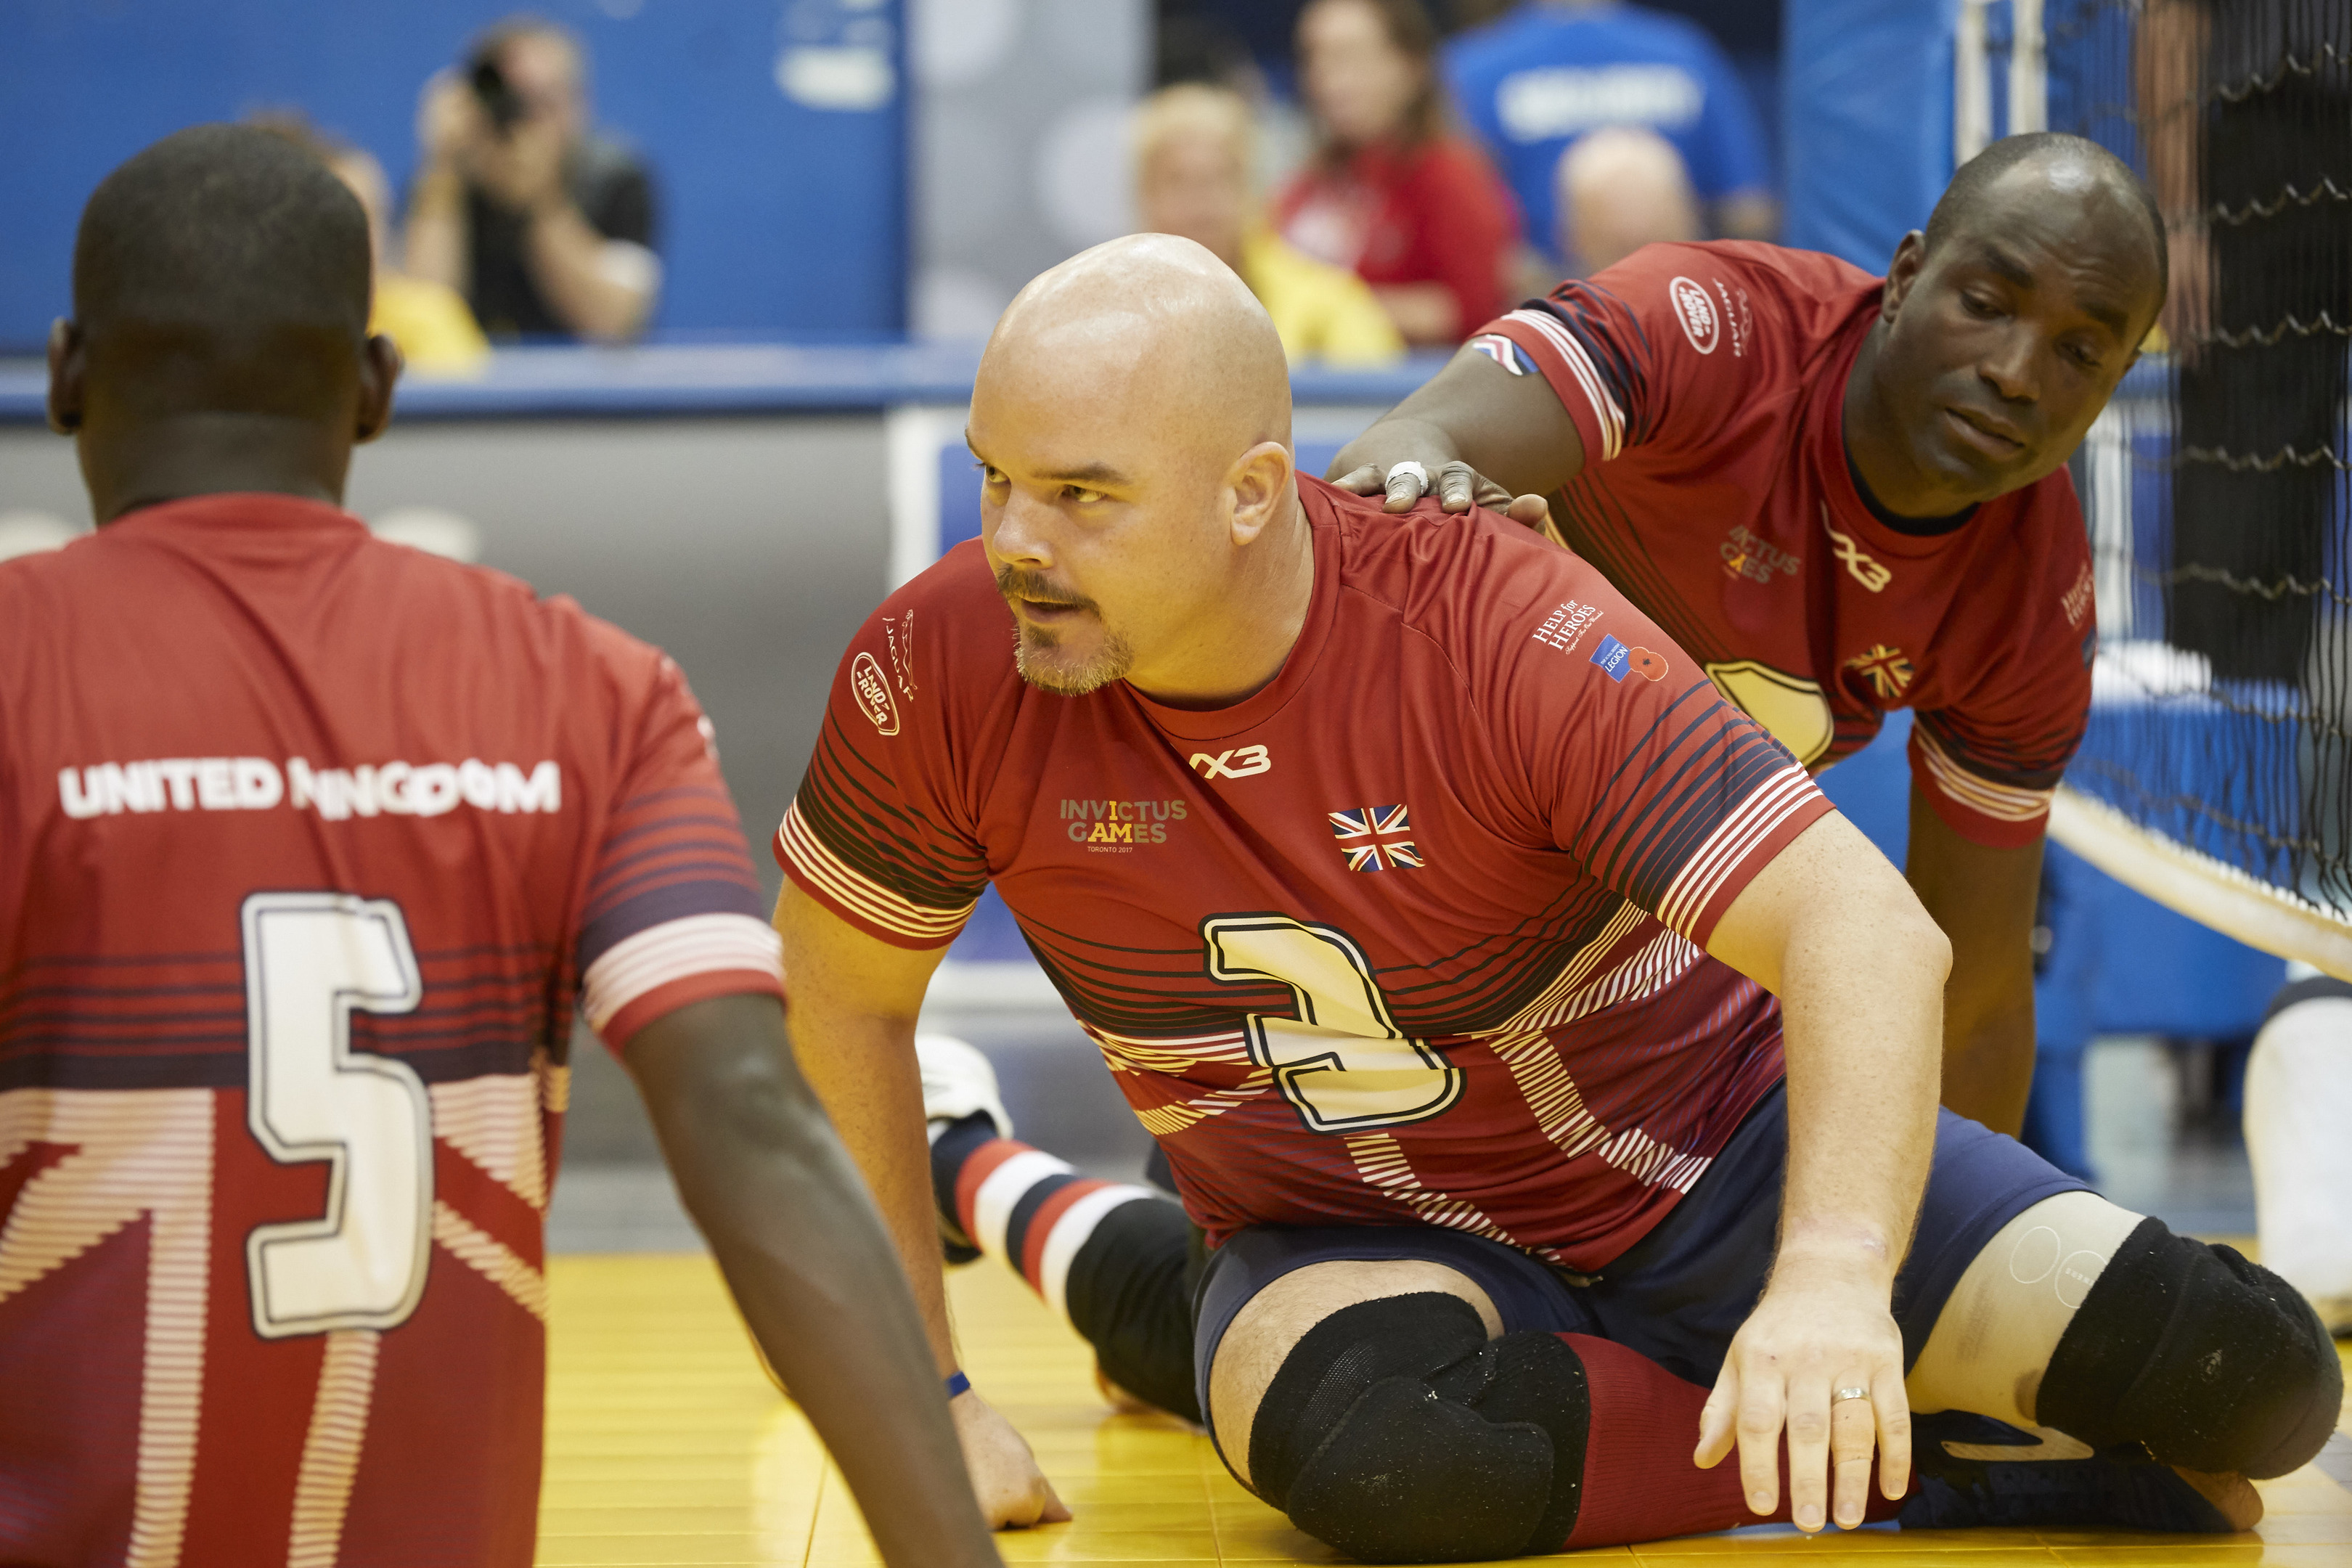 Invictus Games Toronto 2017, UK Team supported by Help for Heroes